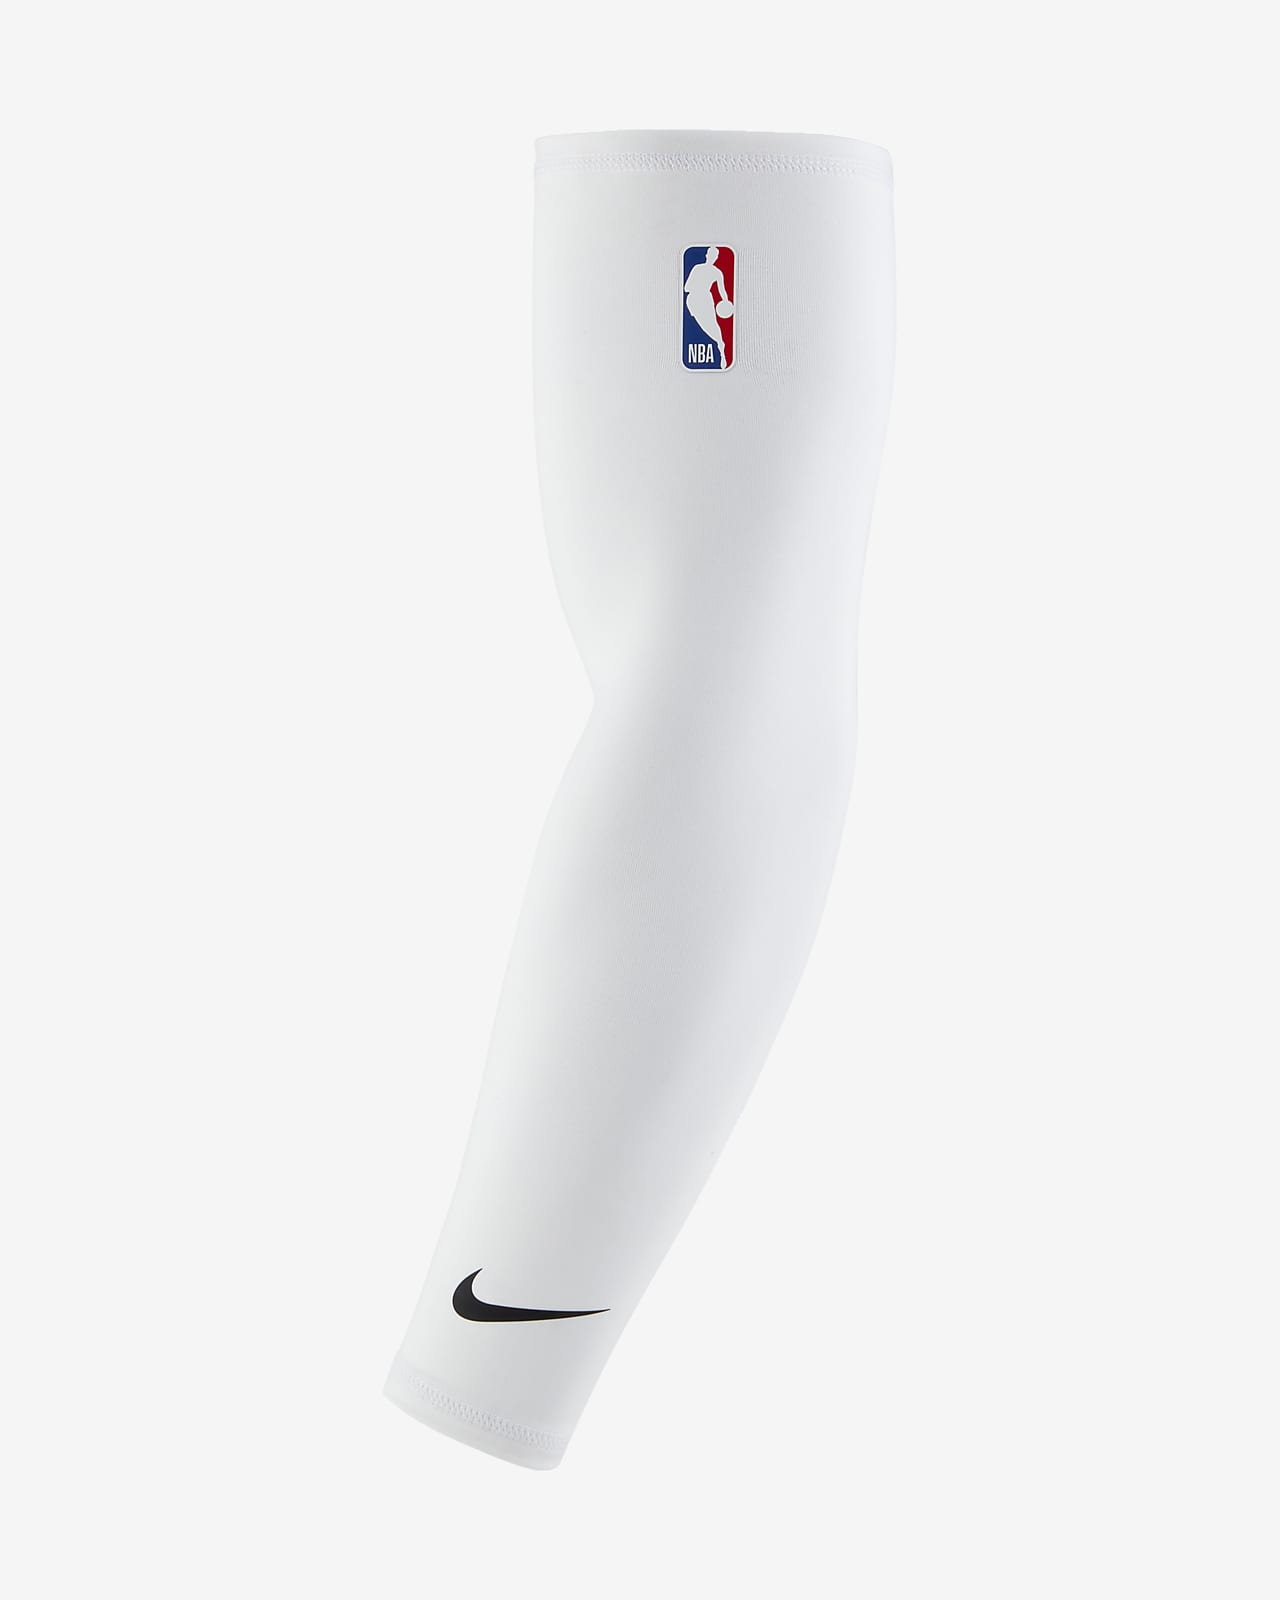 Best Arm Sleeves for Basketball in 2023 - Shooting Sleeves in the